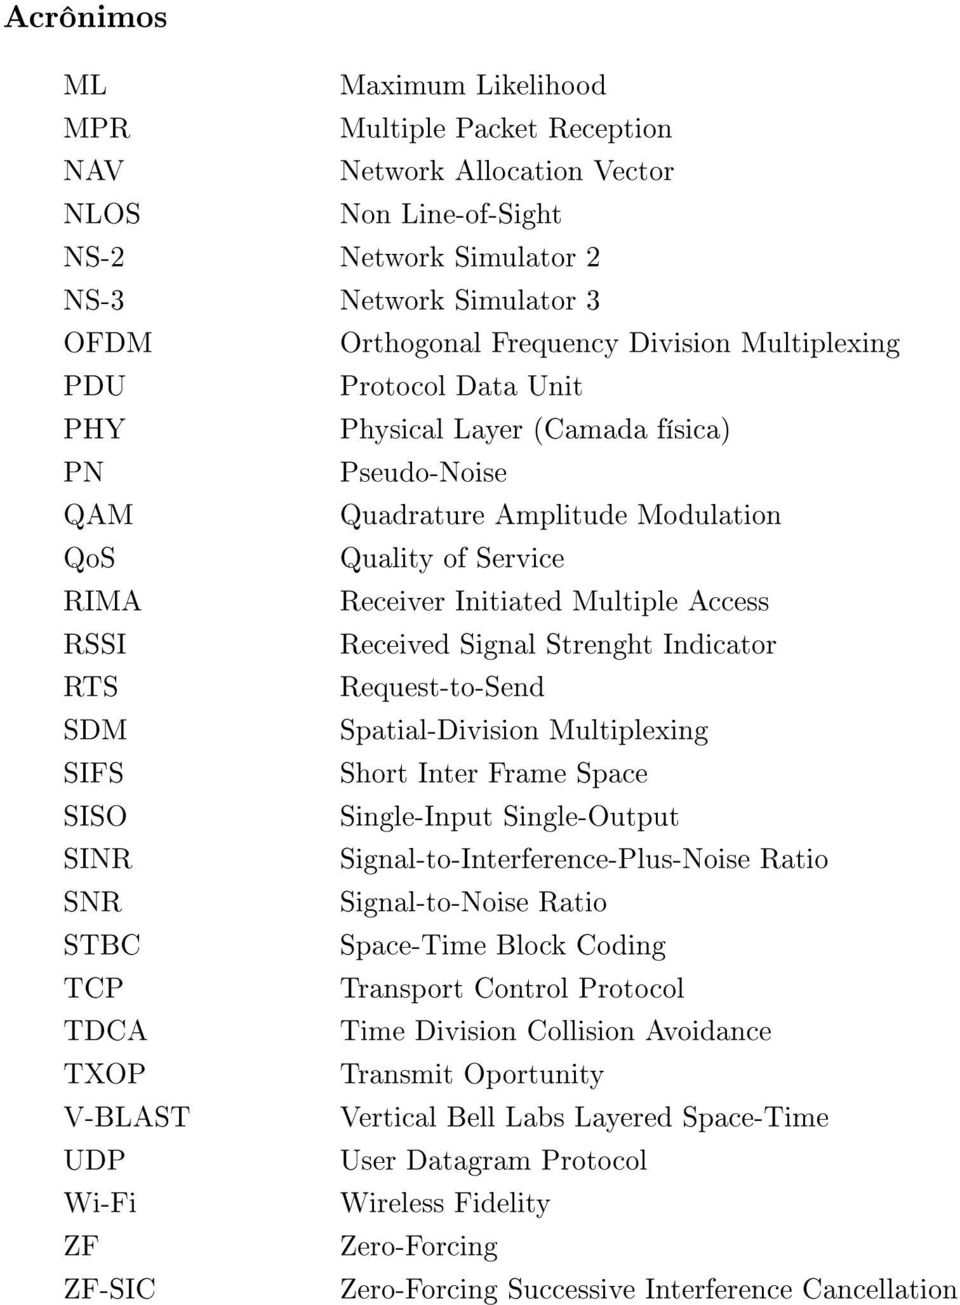 Signal Strenght Indicator RTS Request-to-Send SDM Spatial-Division Multiplexing SIFS Short Inter Frame Space SISO Single-Input Single-Output SINR Signal-to-Interference-Plus-Noise Ratio SNR